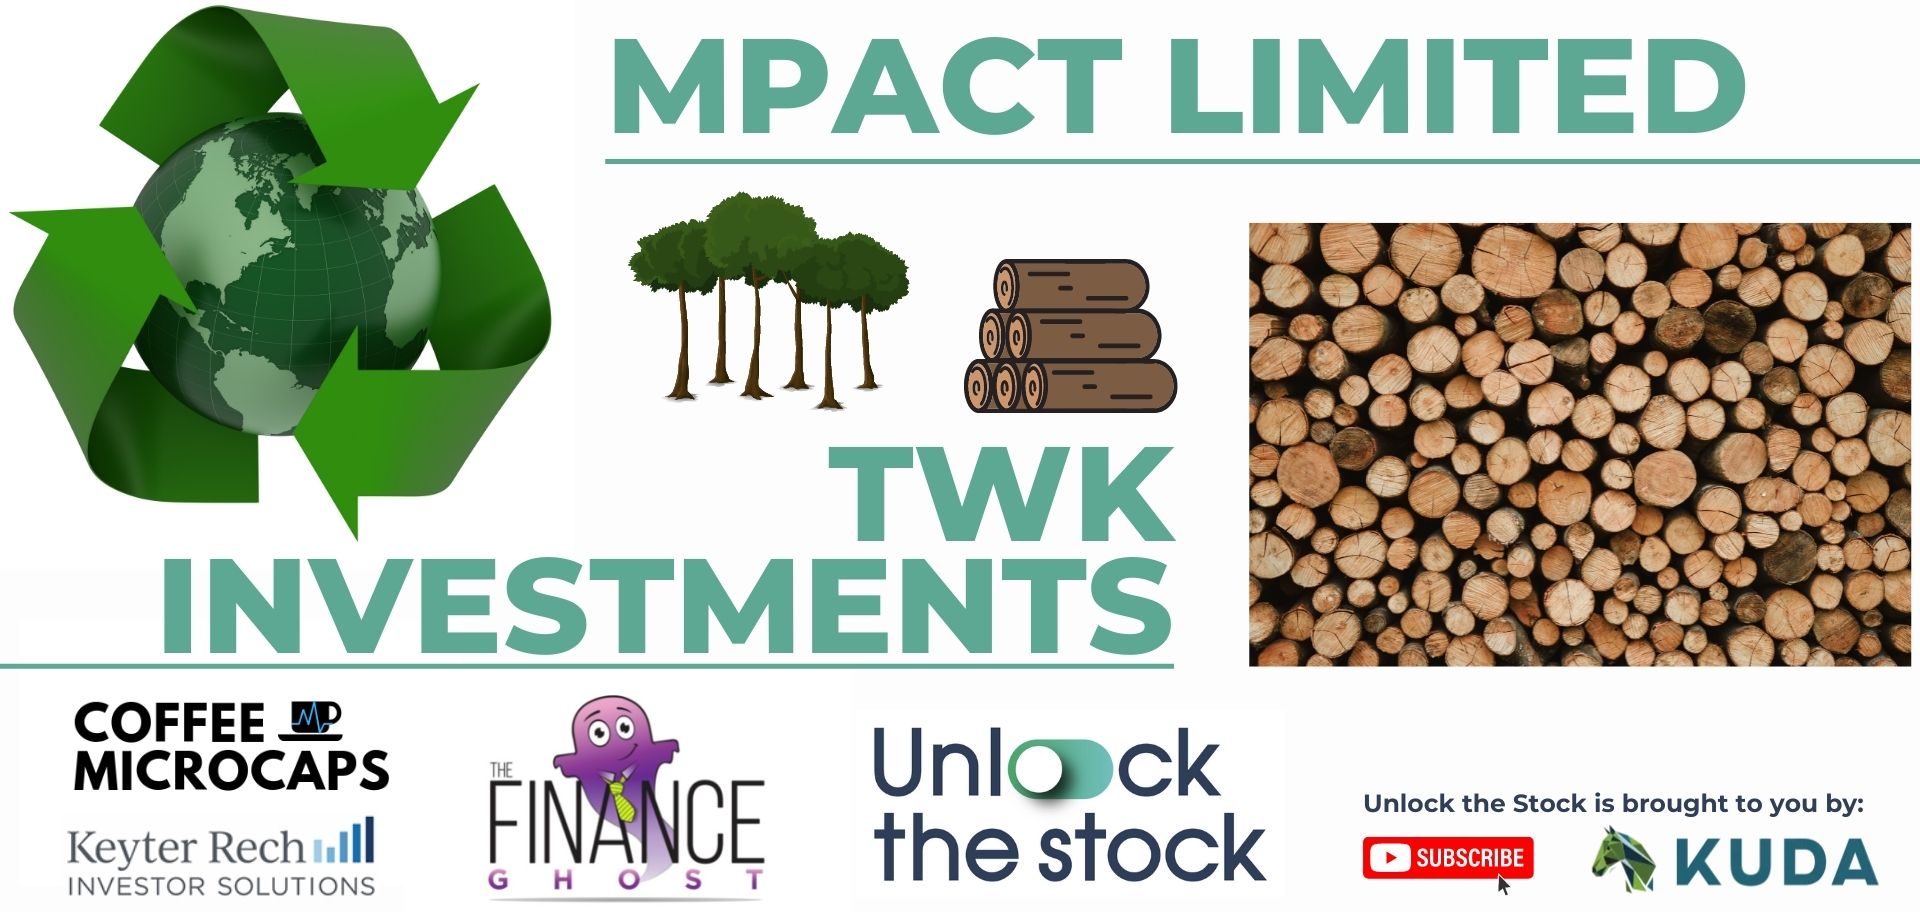 Unlock the Stock: Mpact Limited and TWK Investments